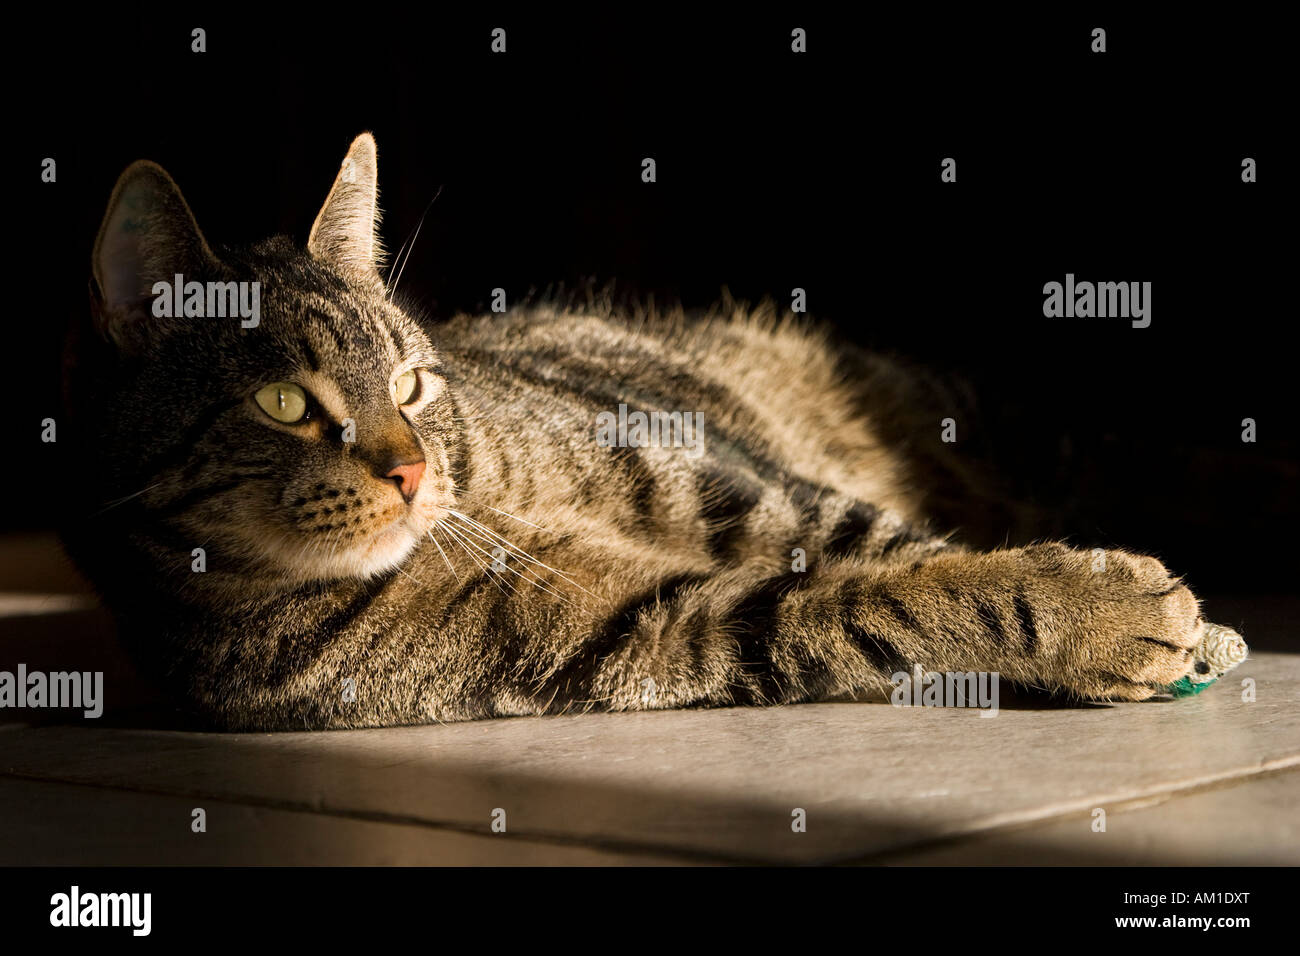 European shorthair cat with a toy mouse Stock Photo